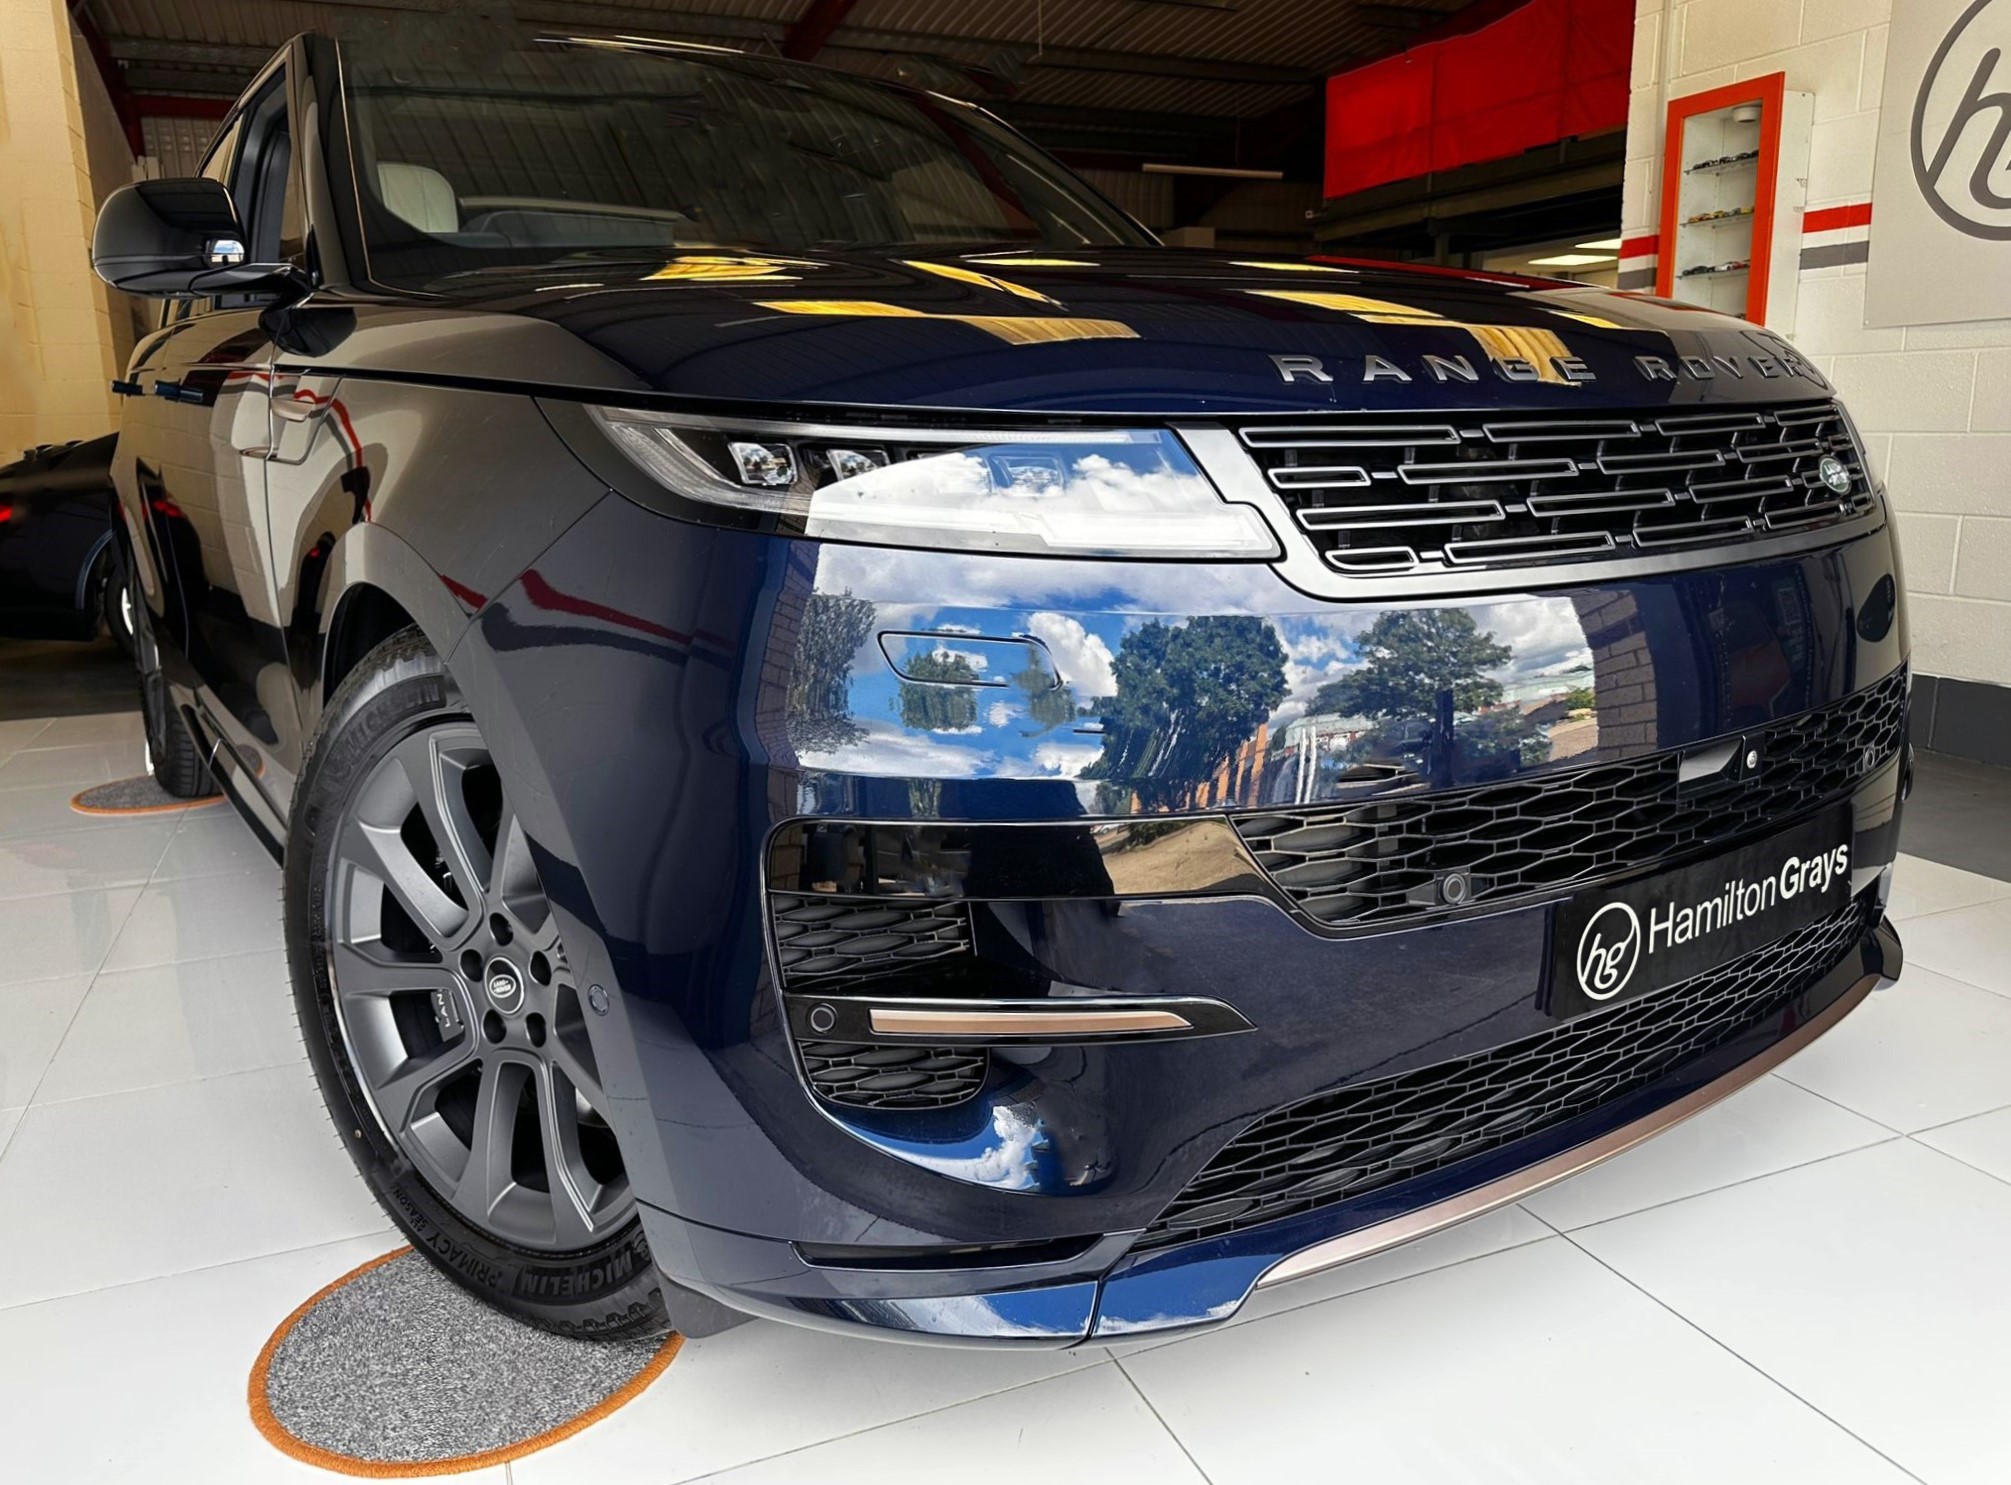 2023 (23) Range Rover Sport 3.0 D300 MHEV Dynamic SE 4WD. In Portofino Blue Metallic over Light Cloud / Ebony Leather. Just 1,050miles. With Extensive Spec’. Mild Hybrid Version..  (SOLD)